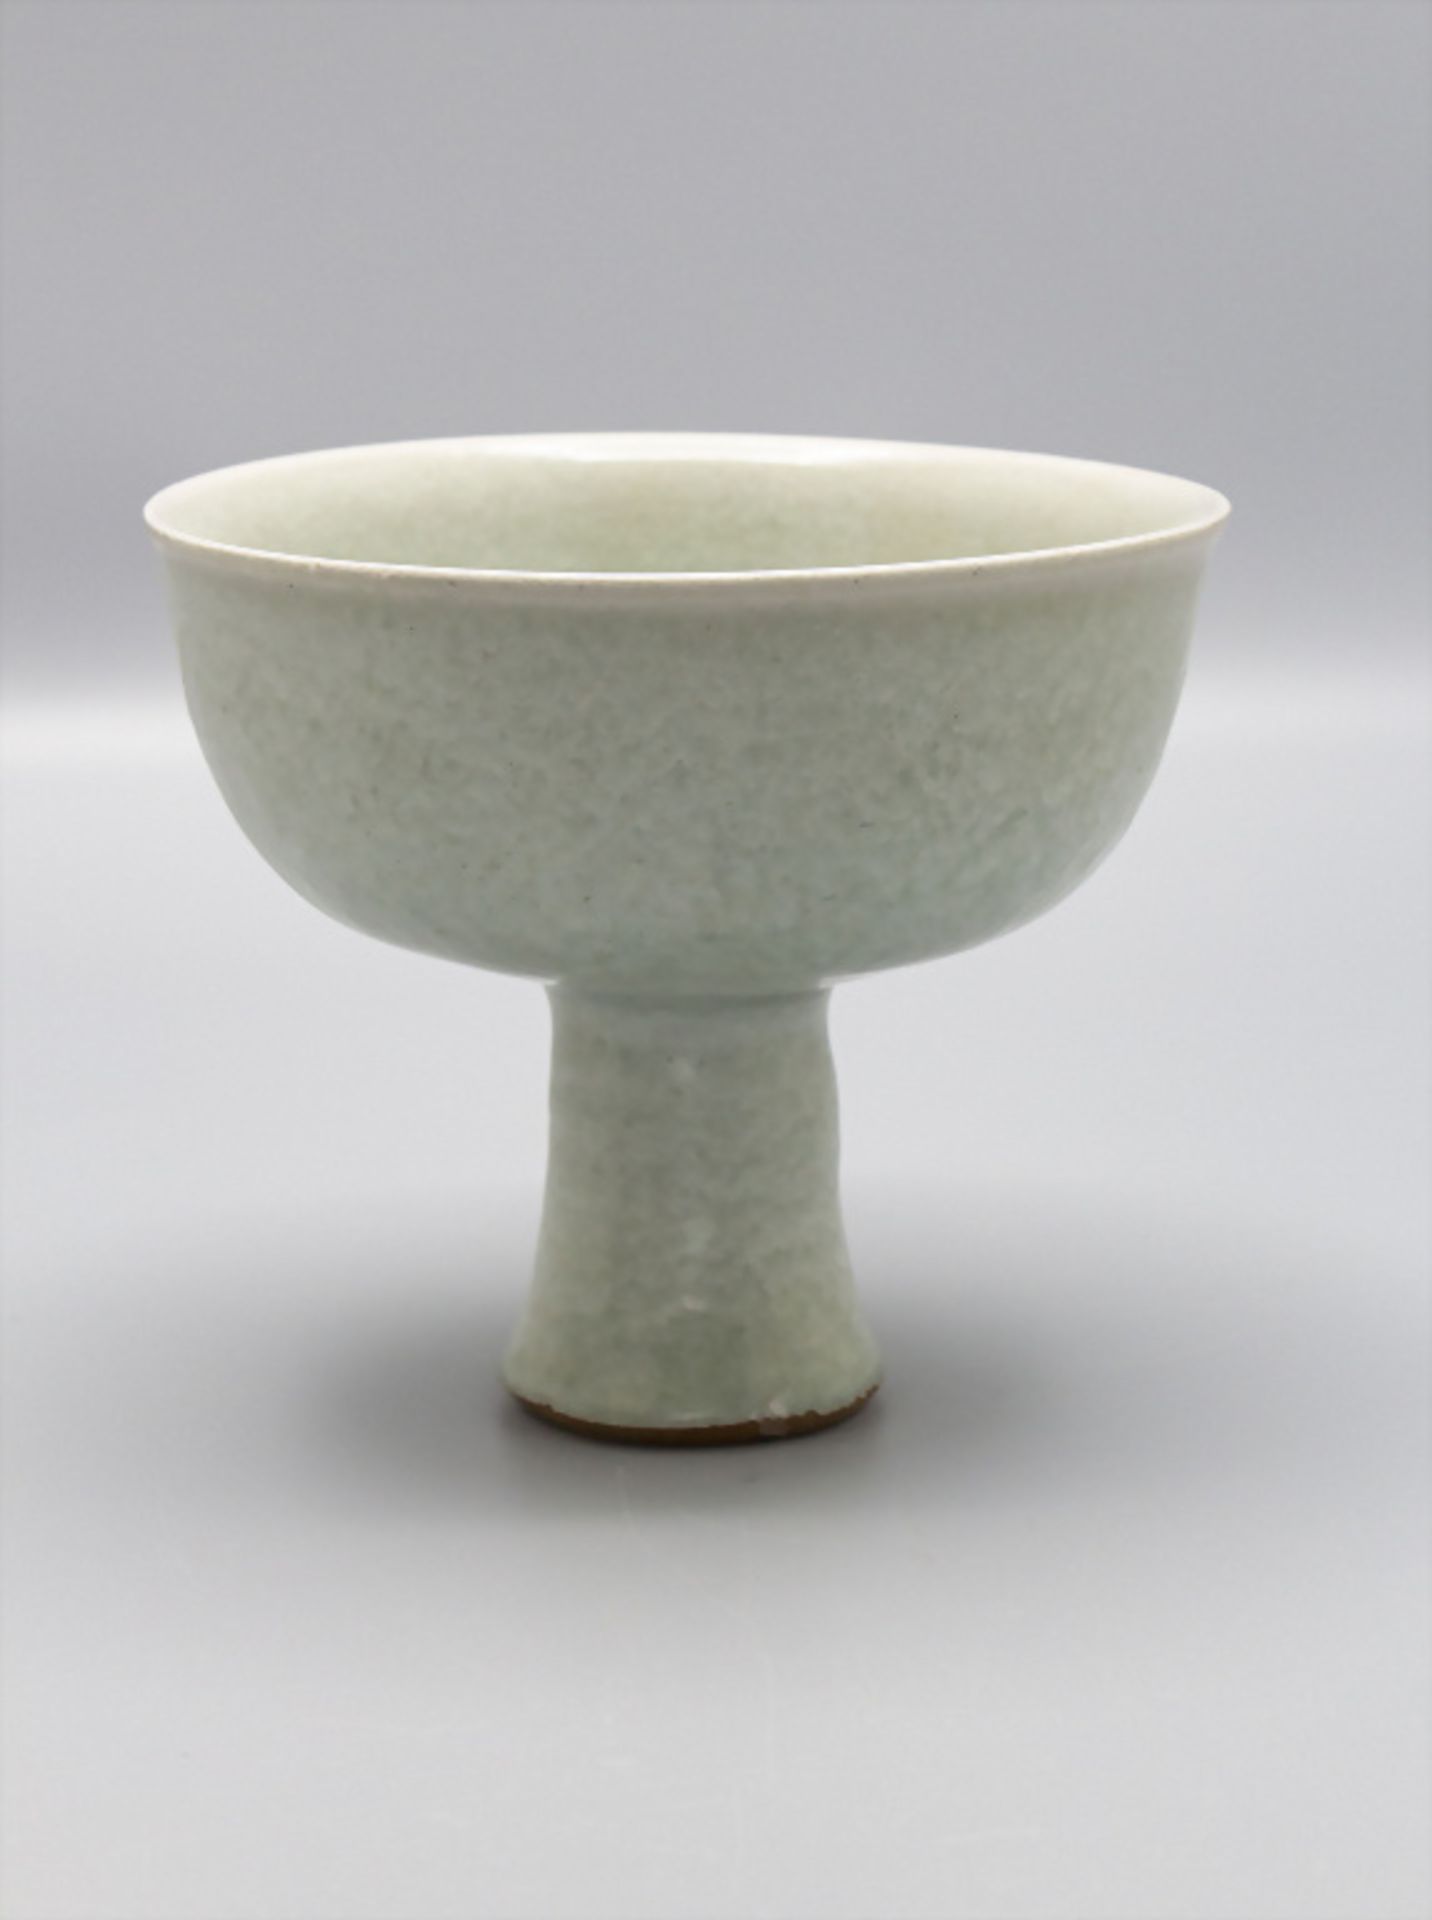 Seladon Fußbecher / A celadon footed cup 'slamp cup', China, Qing-Zeit, 19.-20. Jh. - Image 2 of 4